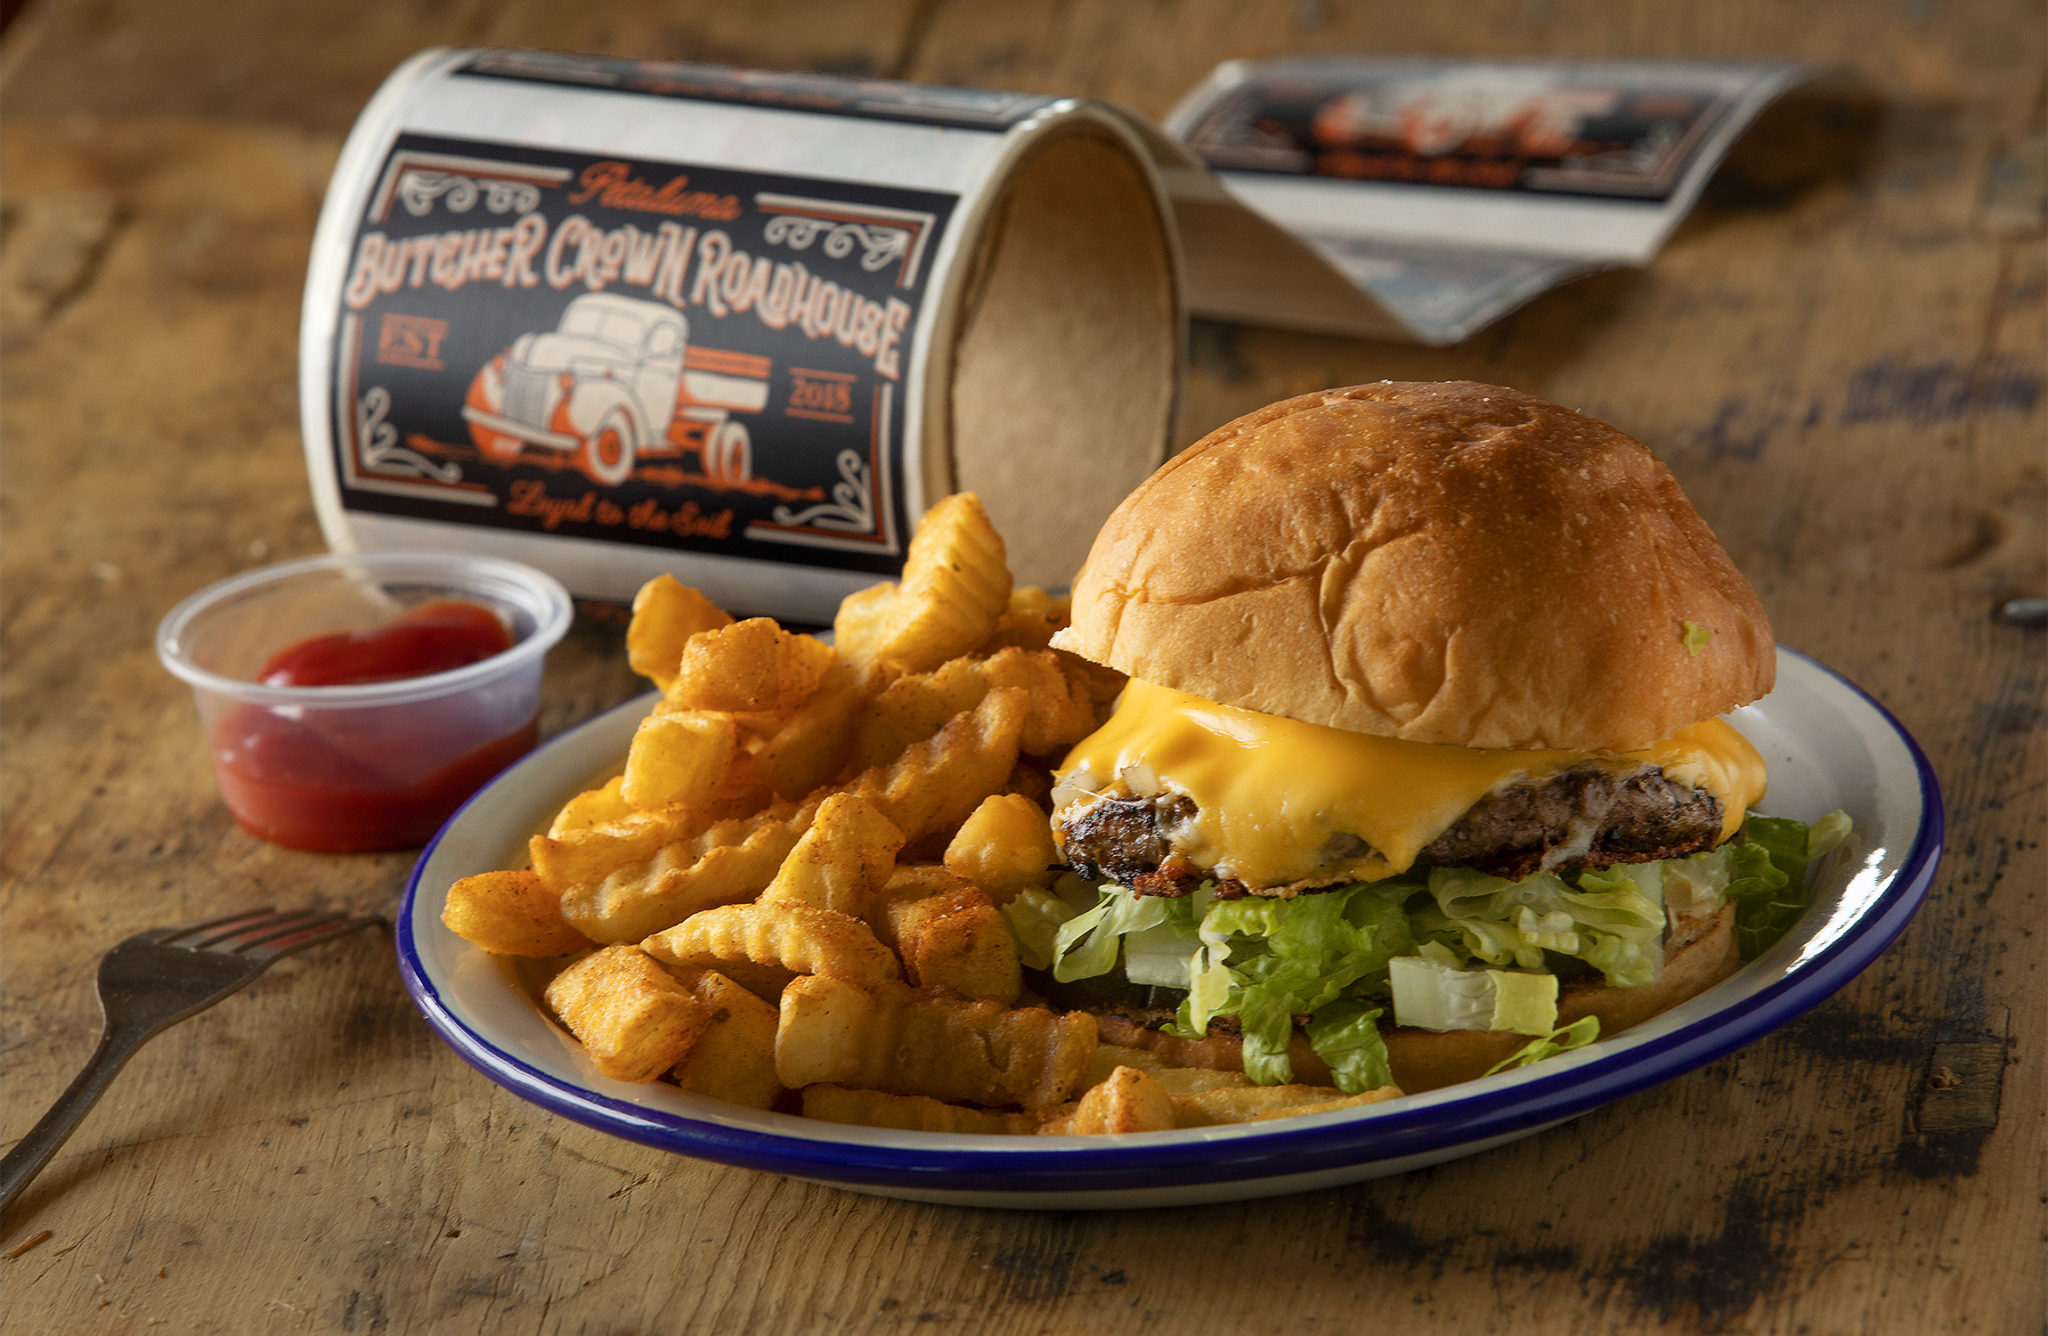 The Butcher Burger with house American, cheddar and jack cheese, iceberg lettuce, smoked 'n' grilled onions and pickles from the Butcher Crown Roadhouse in Petaluma. (John Burgess / The Press Democrat)